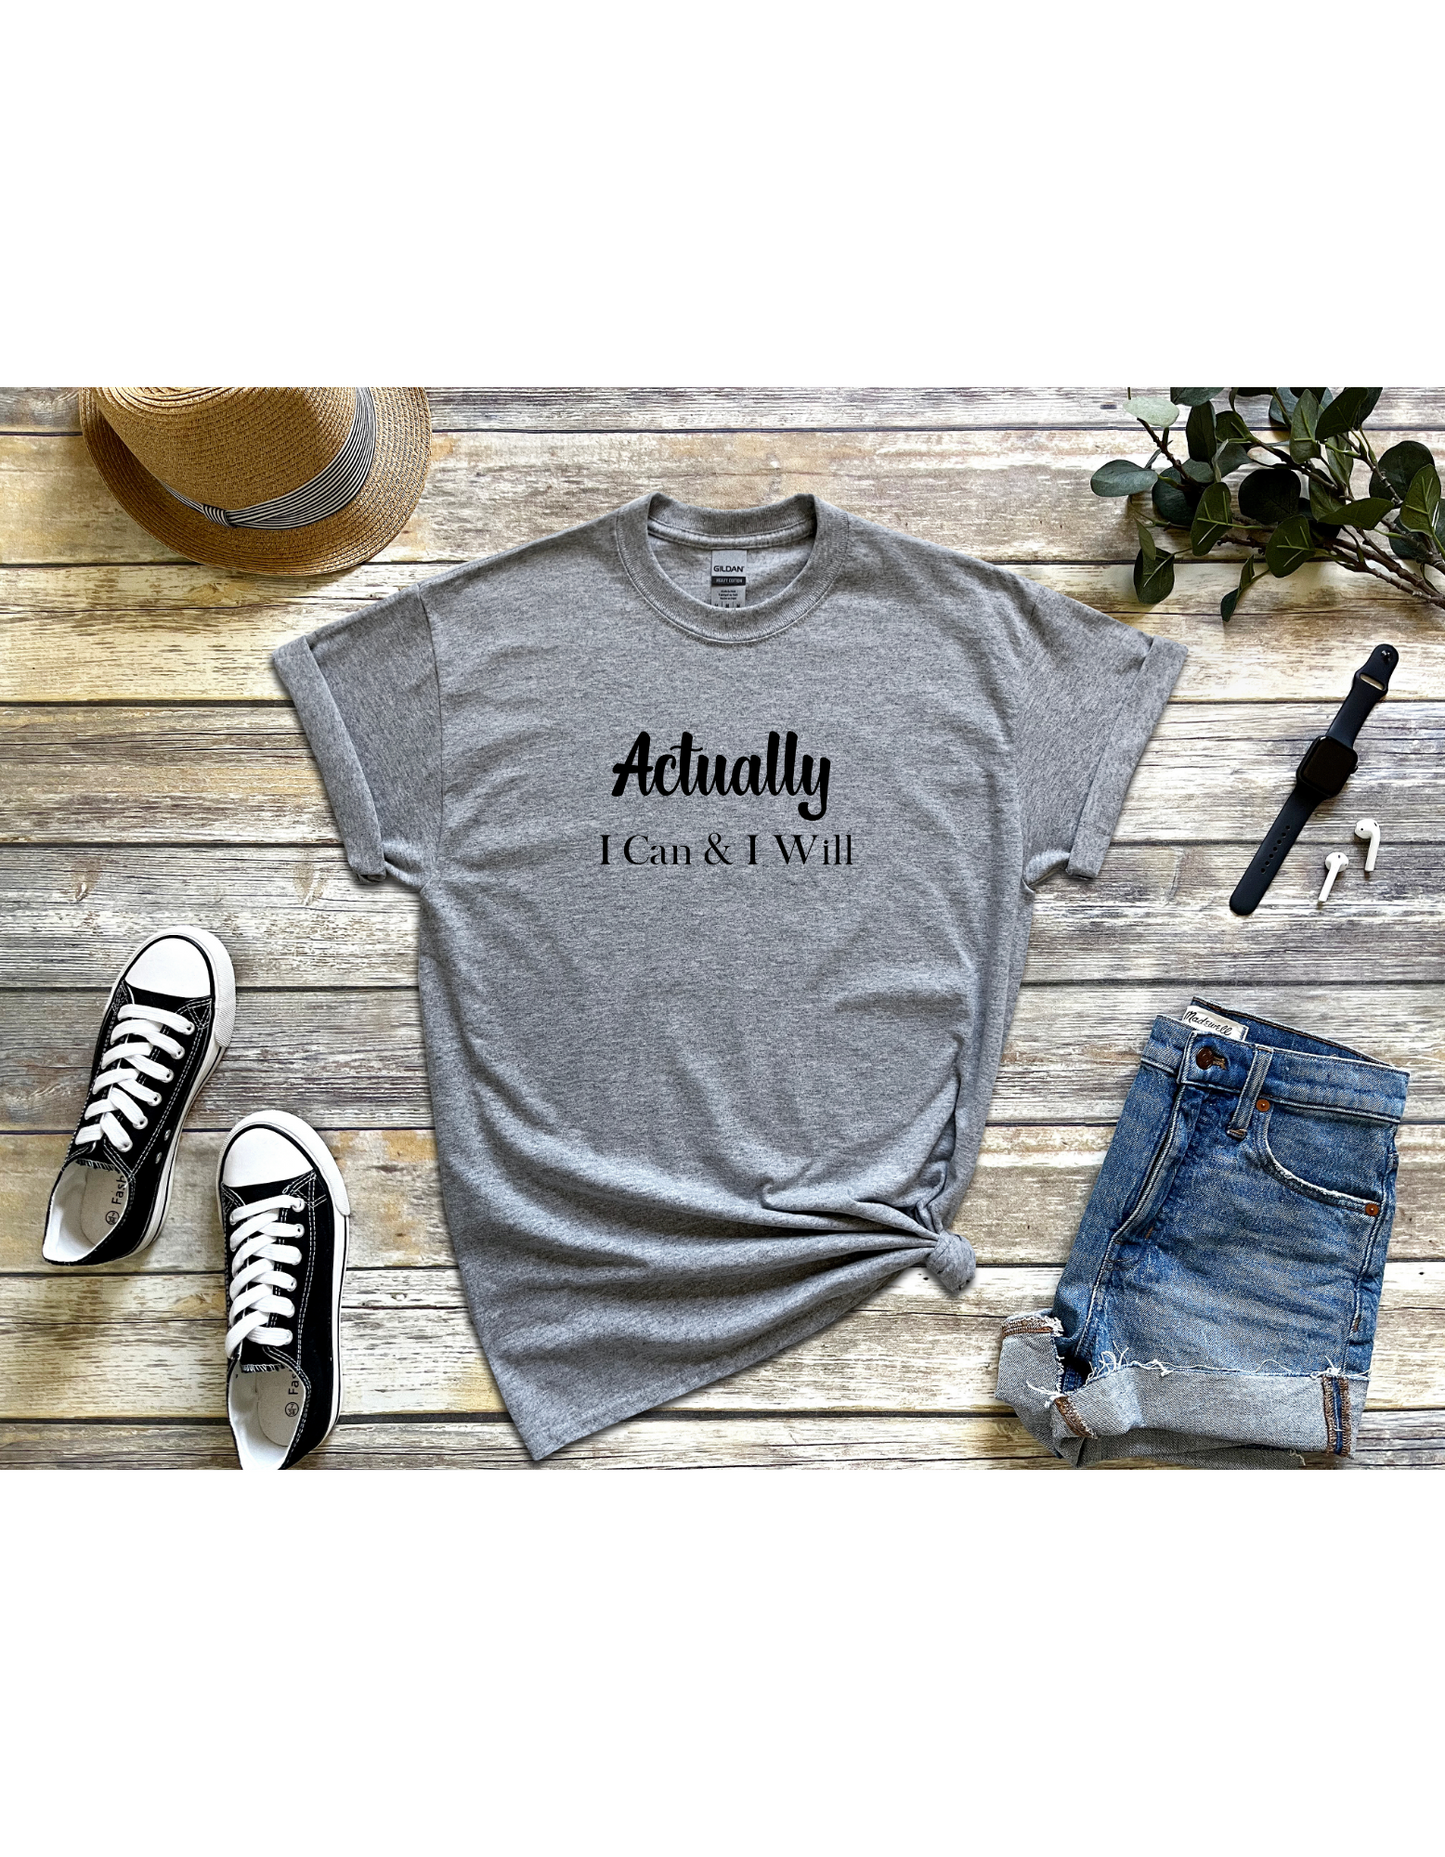 Actually, I Can & I Will Motivational Tee